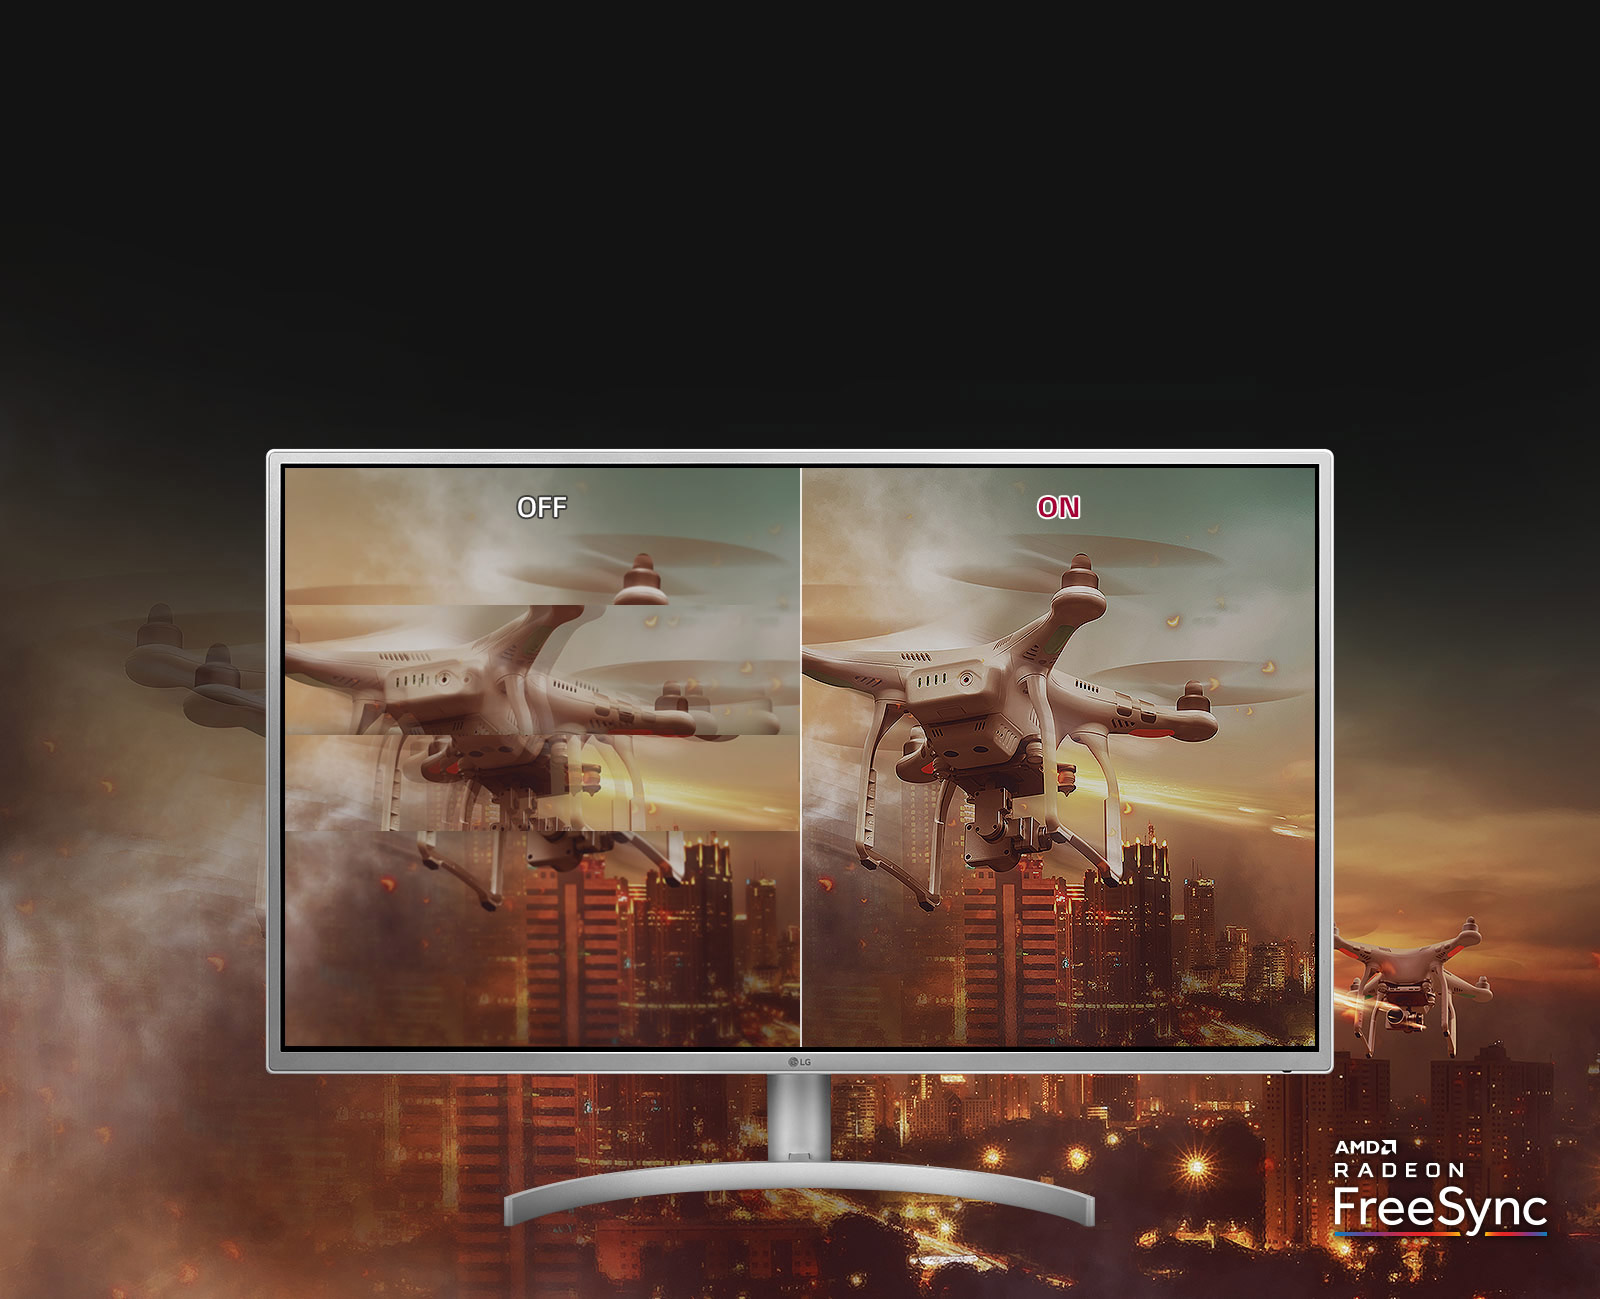 AMD Radeon FreeSync off and on examples on the LG 32QK500-W monitor. The on-screen image being tested is a drone flying over a smoky nighttime city